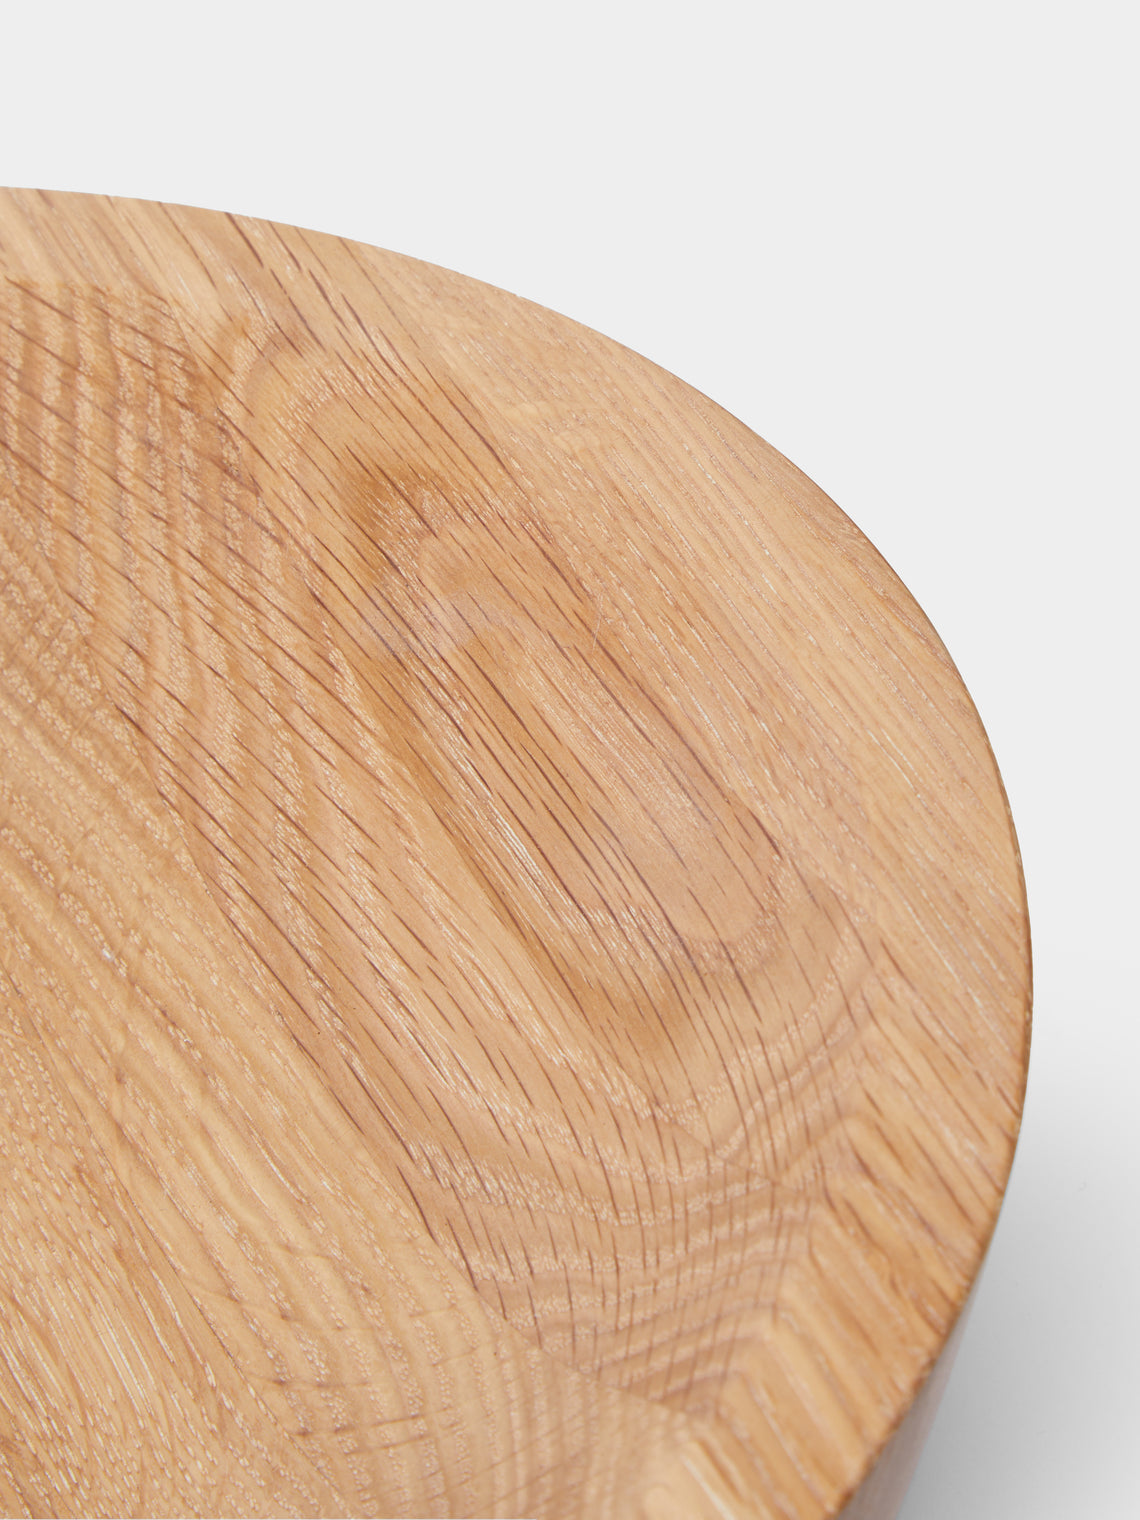 The Wooden Palate - White Oak Large Oval Bowl -  - ABASK